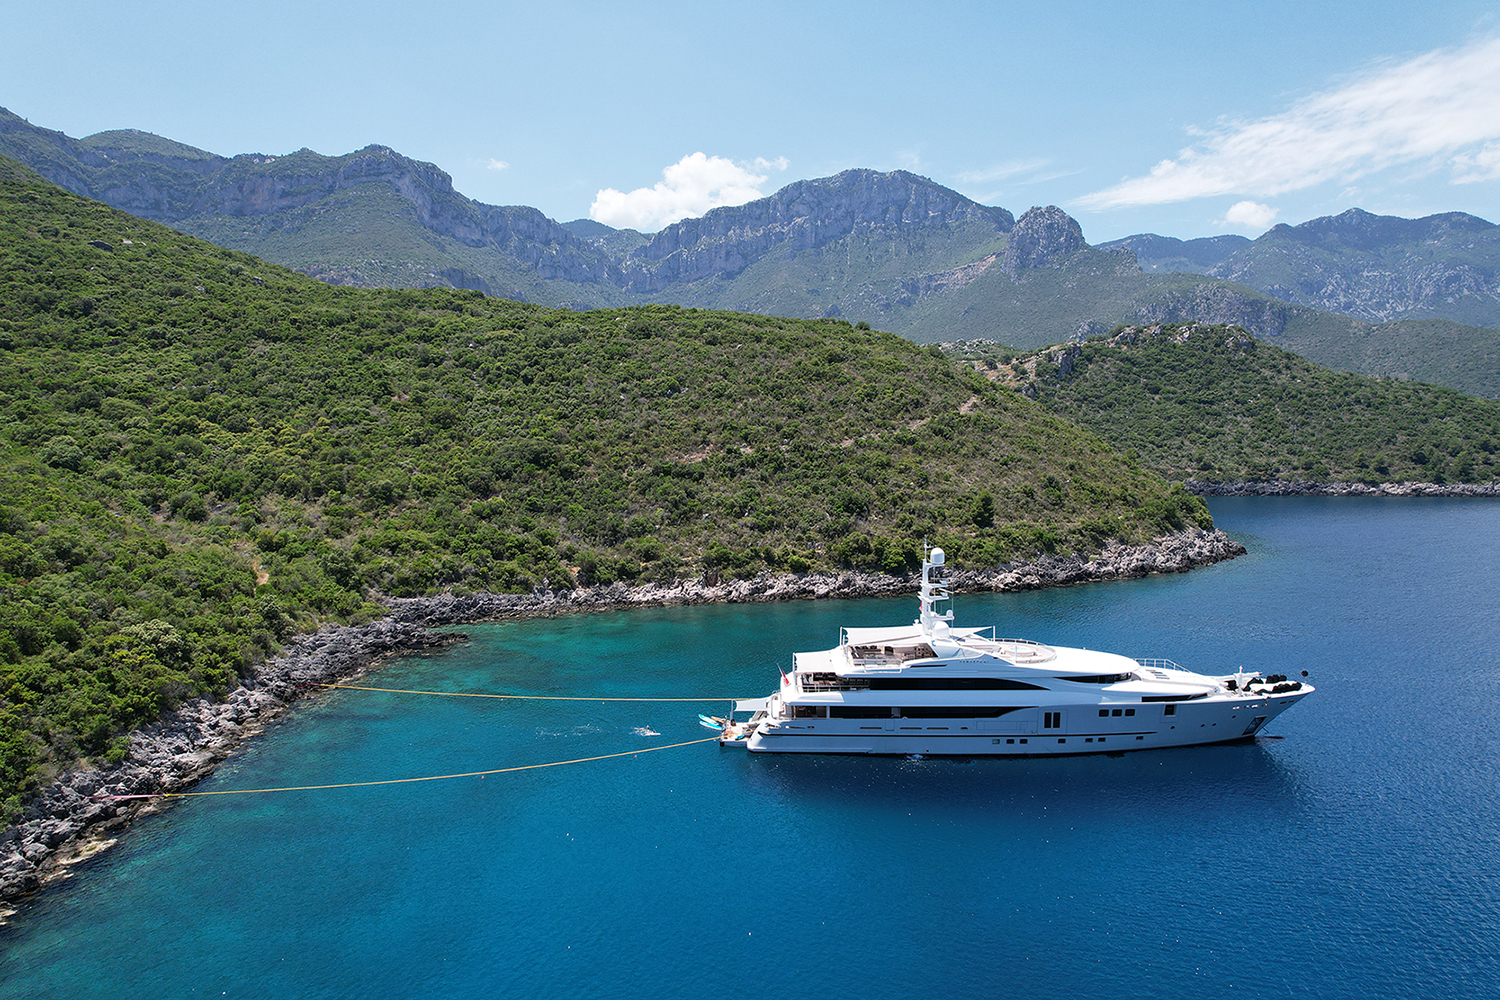 Emperio Yachting Alliance: Best Luxury Yacht Charter and Management Company